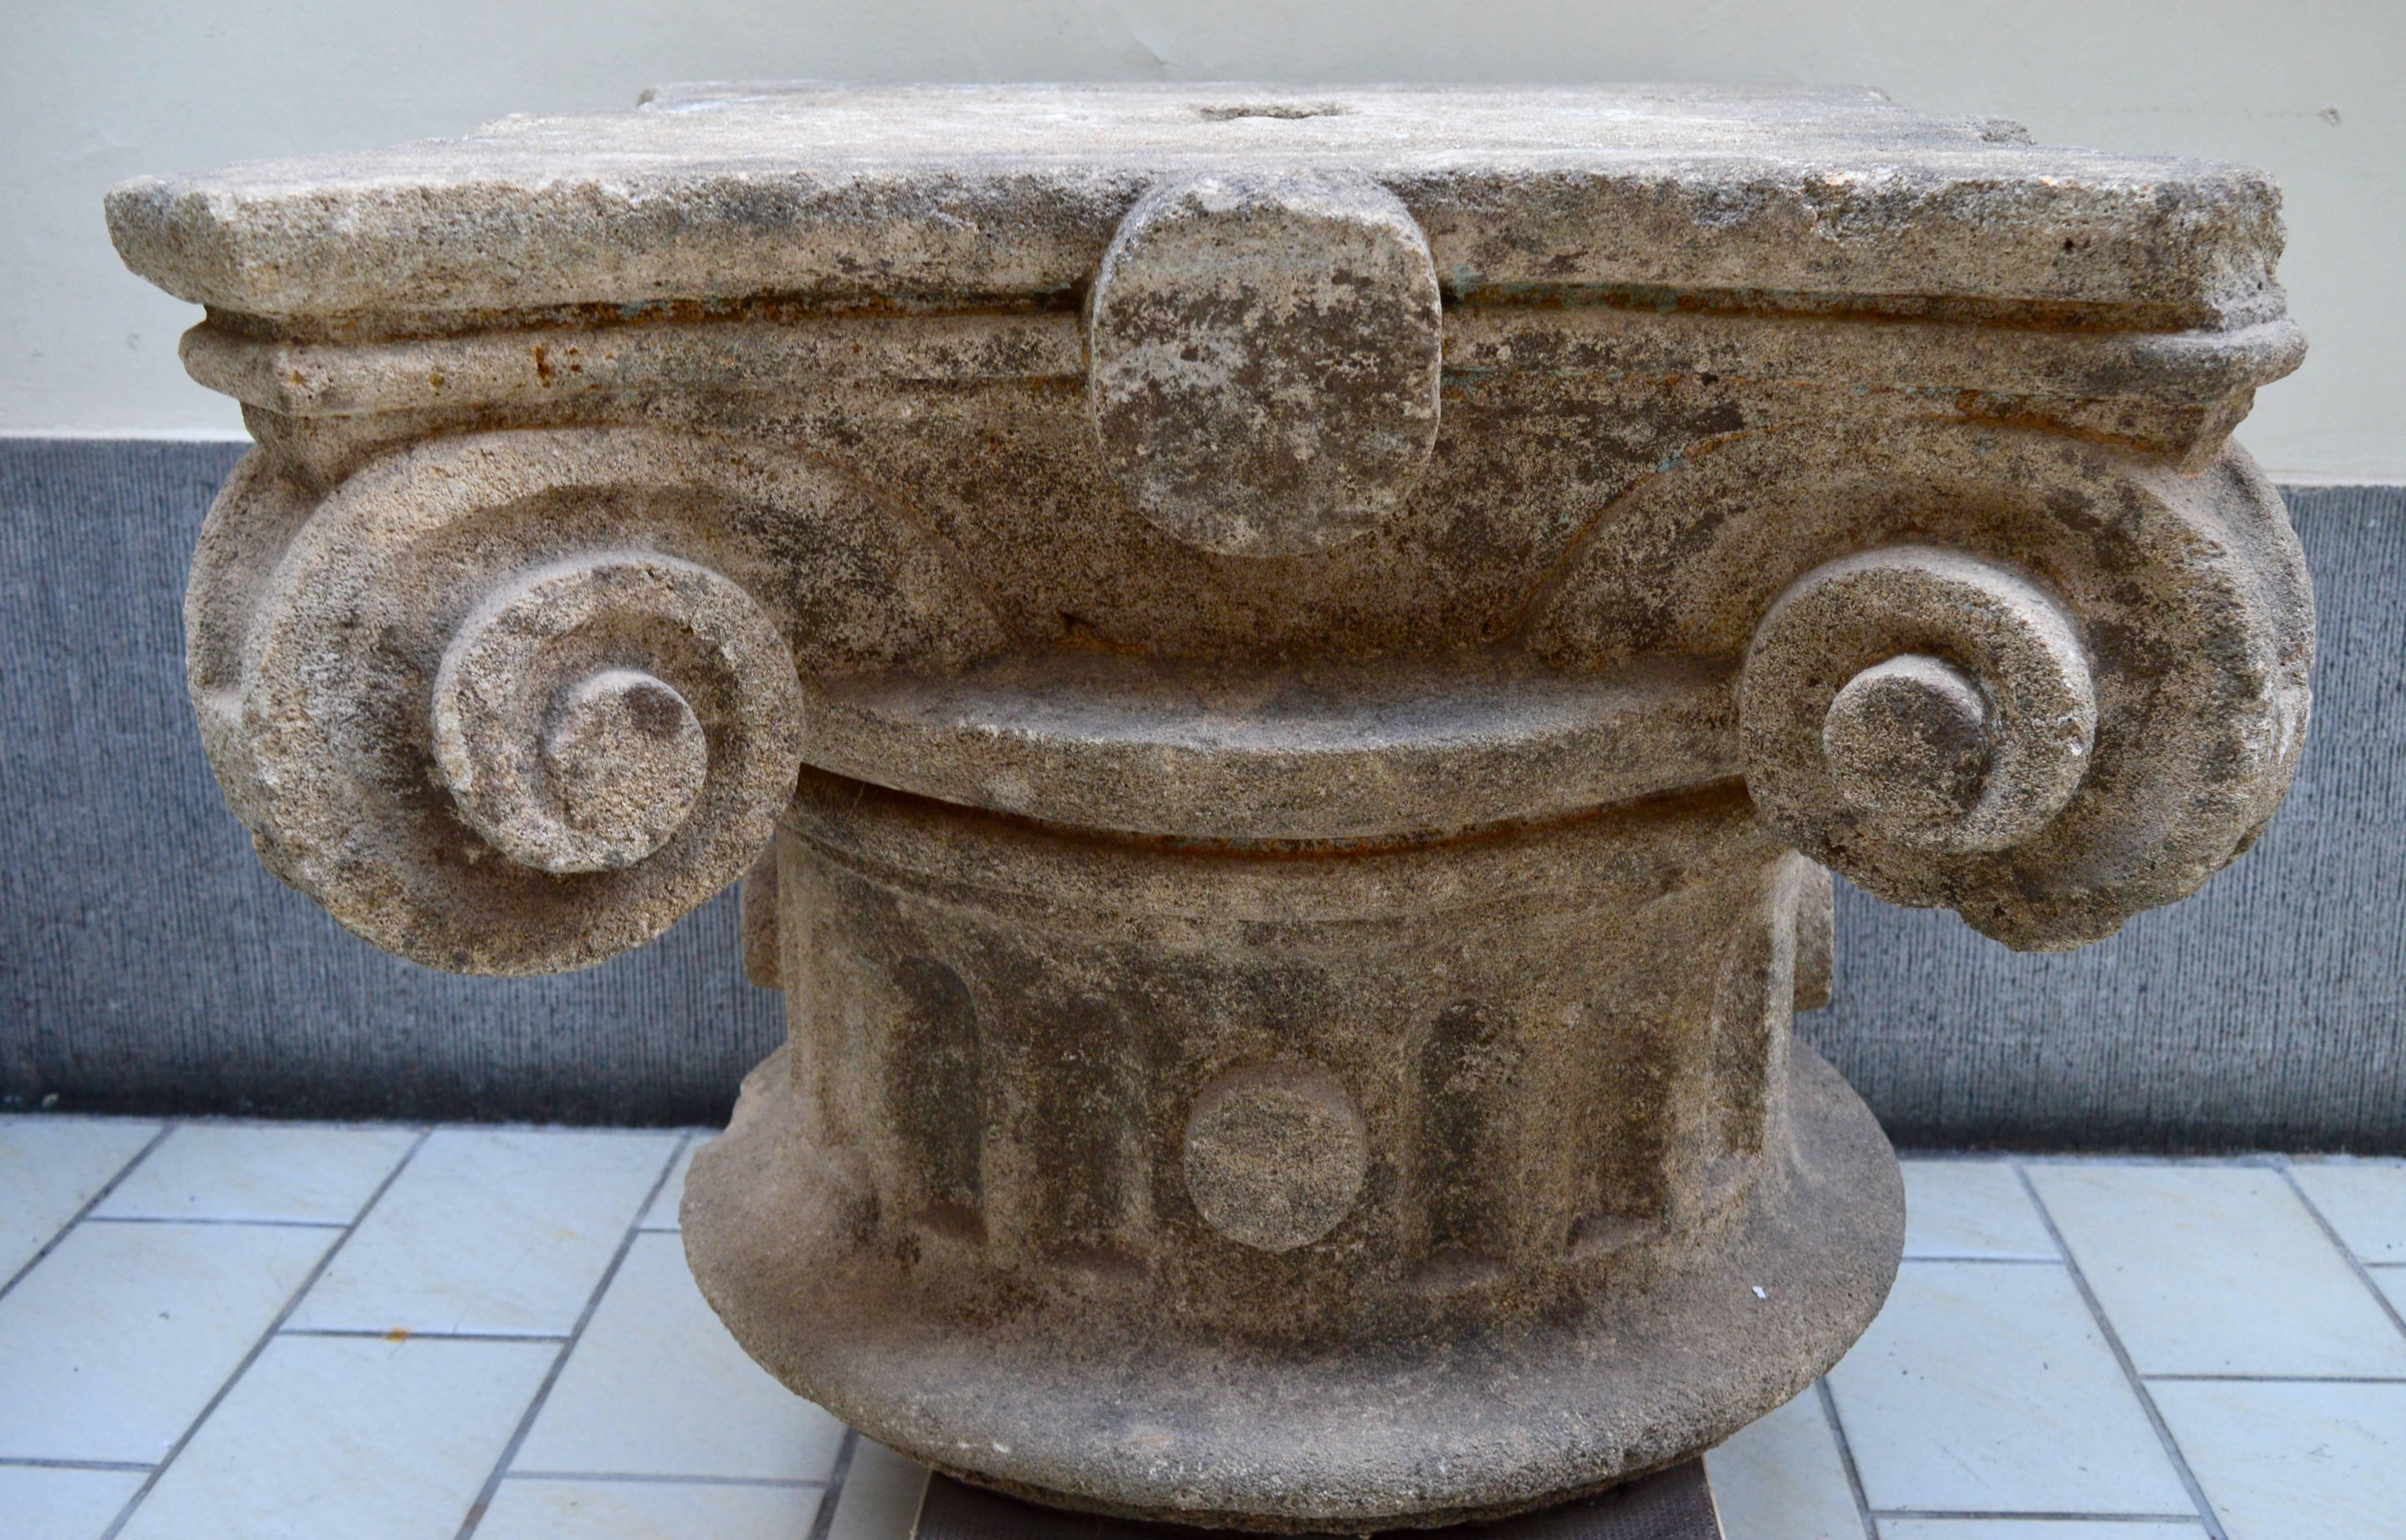  Robust carved French fossiliferous limestone capitals. Wide curled corners with central oval cartouches on all sides. They could be used alone as decorative elements or as a salon table or side tables with or without a glass top. A rare and elegant